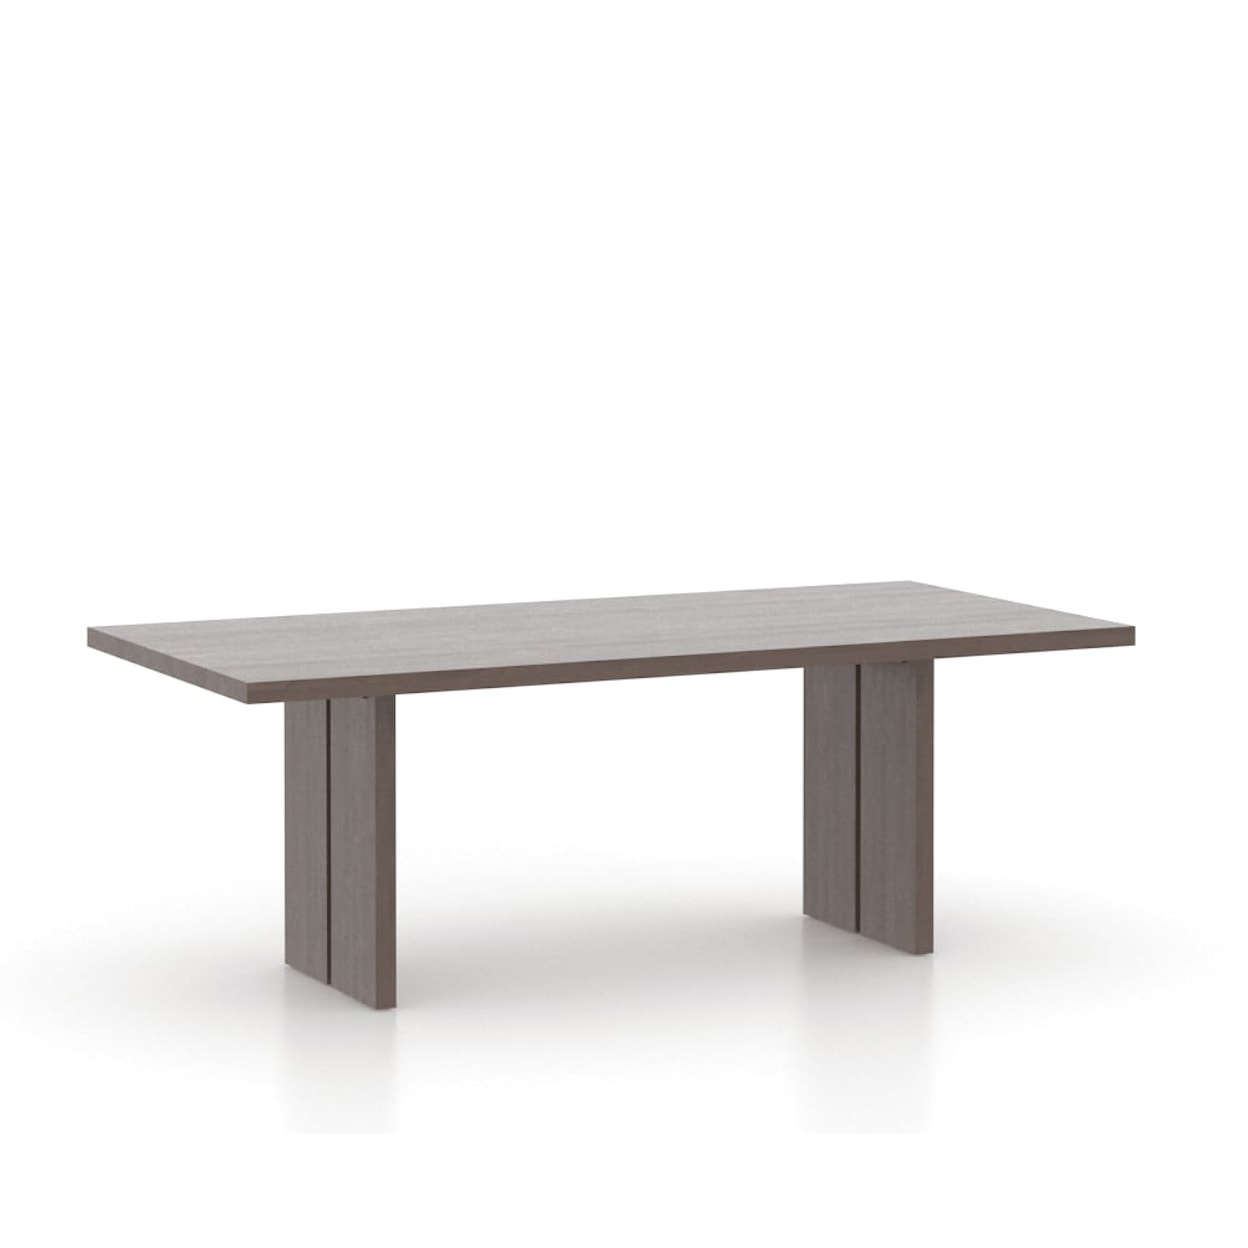 Canadel Modern Dining Table